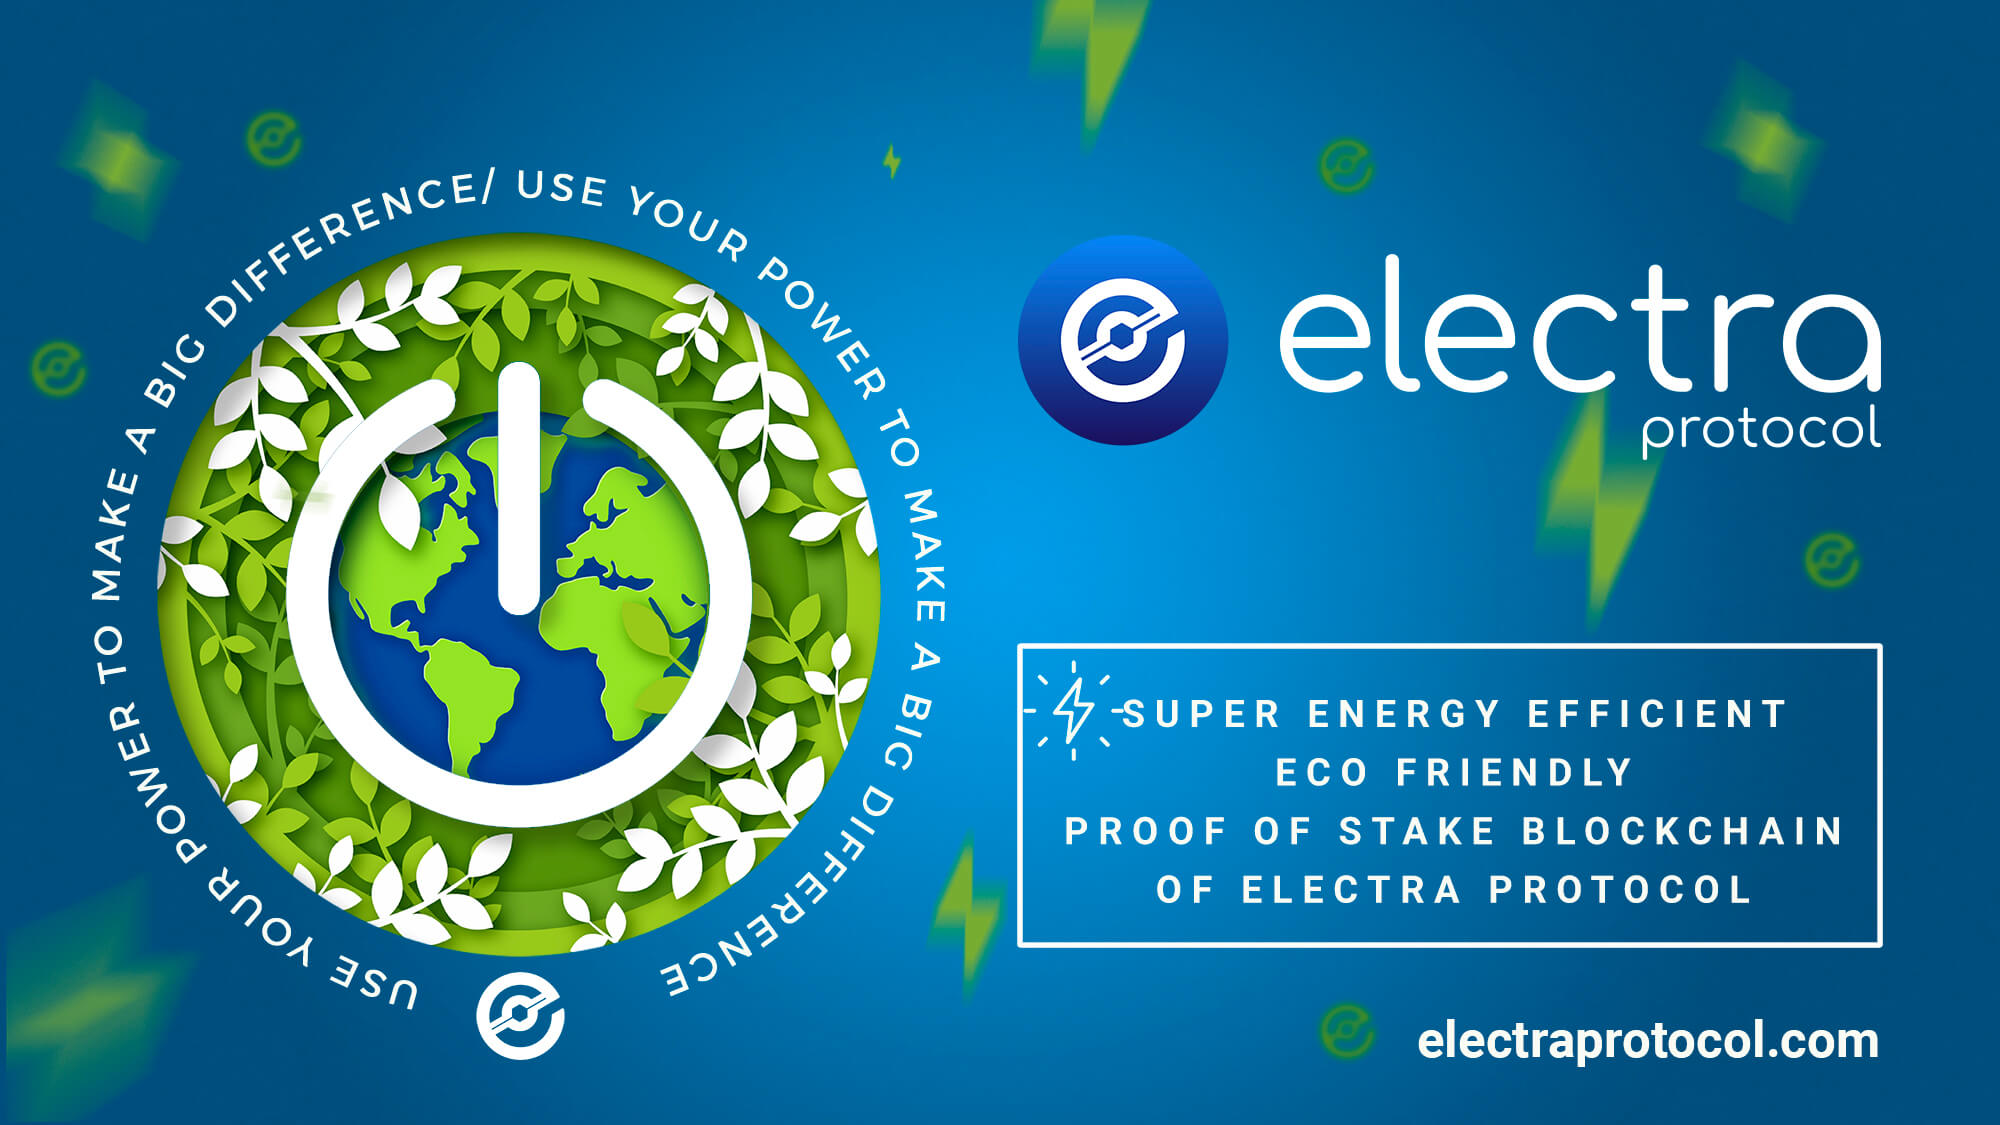 Green Energy Blockchain - Environment-friendly block chain - Electra Protocol - proof of stake - ultrafast